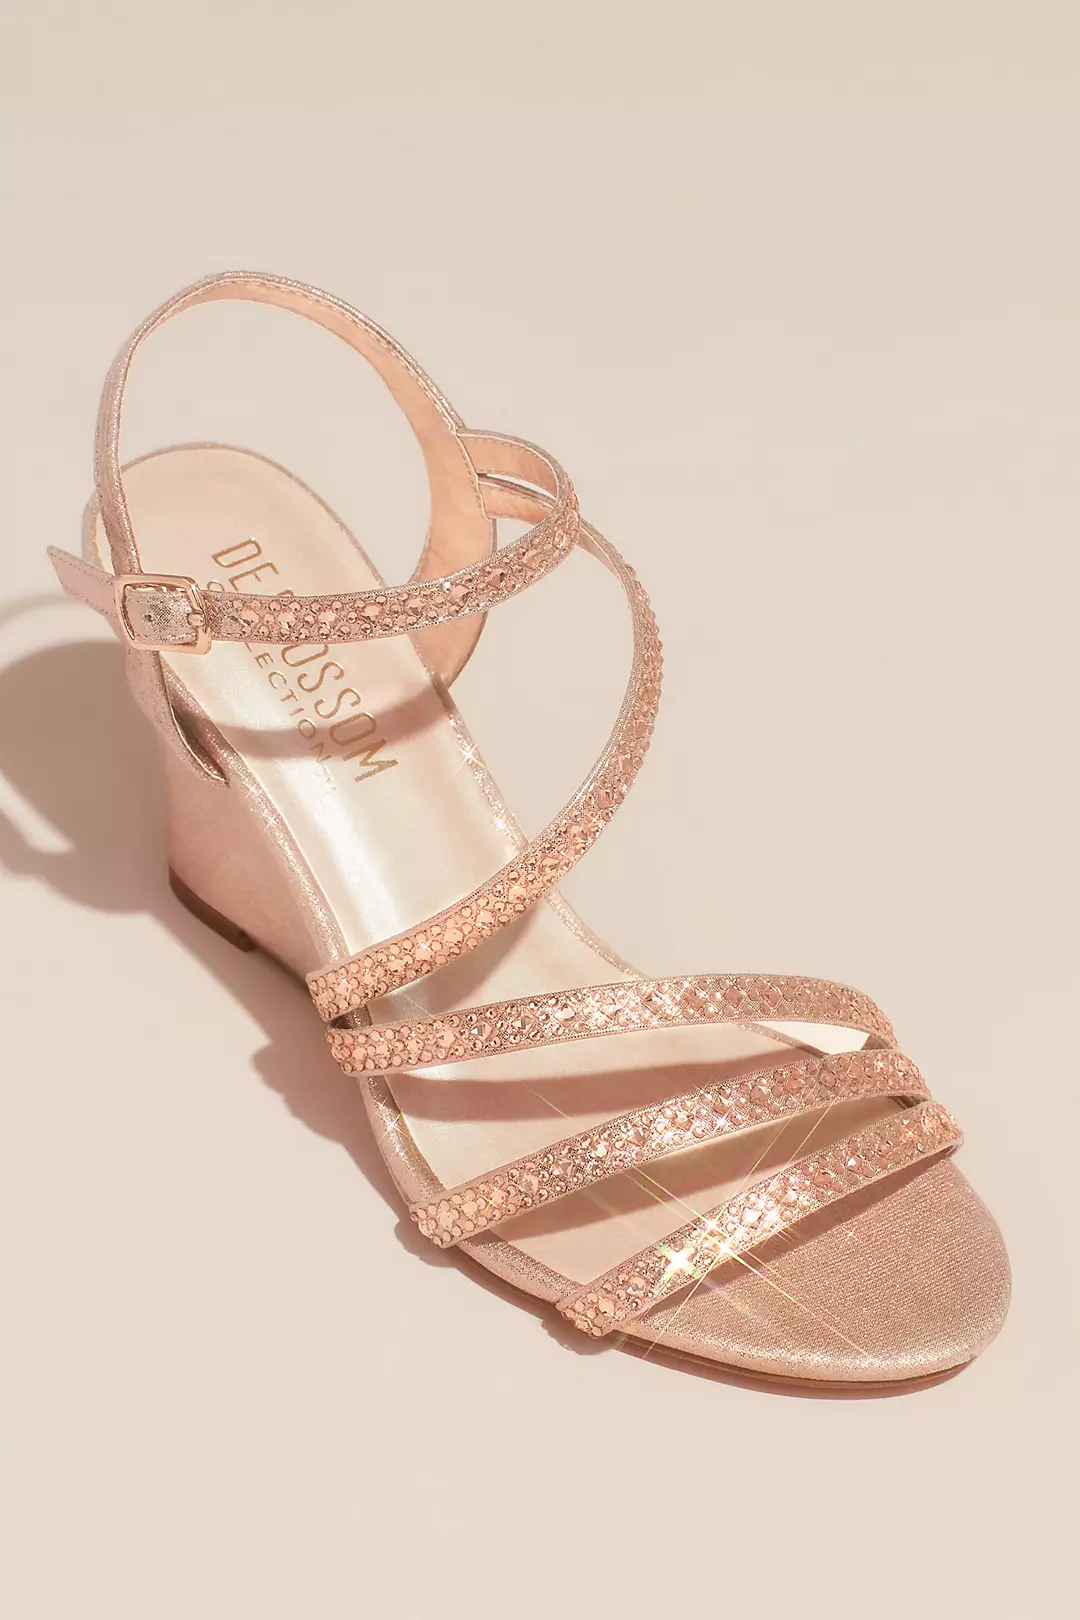 Strappy Low Wedges with Crystal Details Image